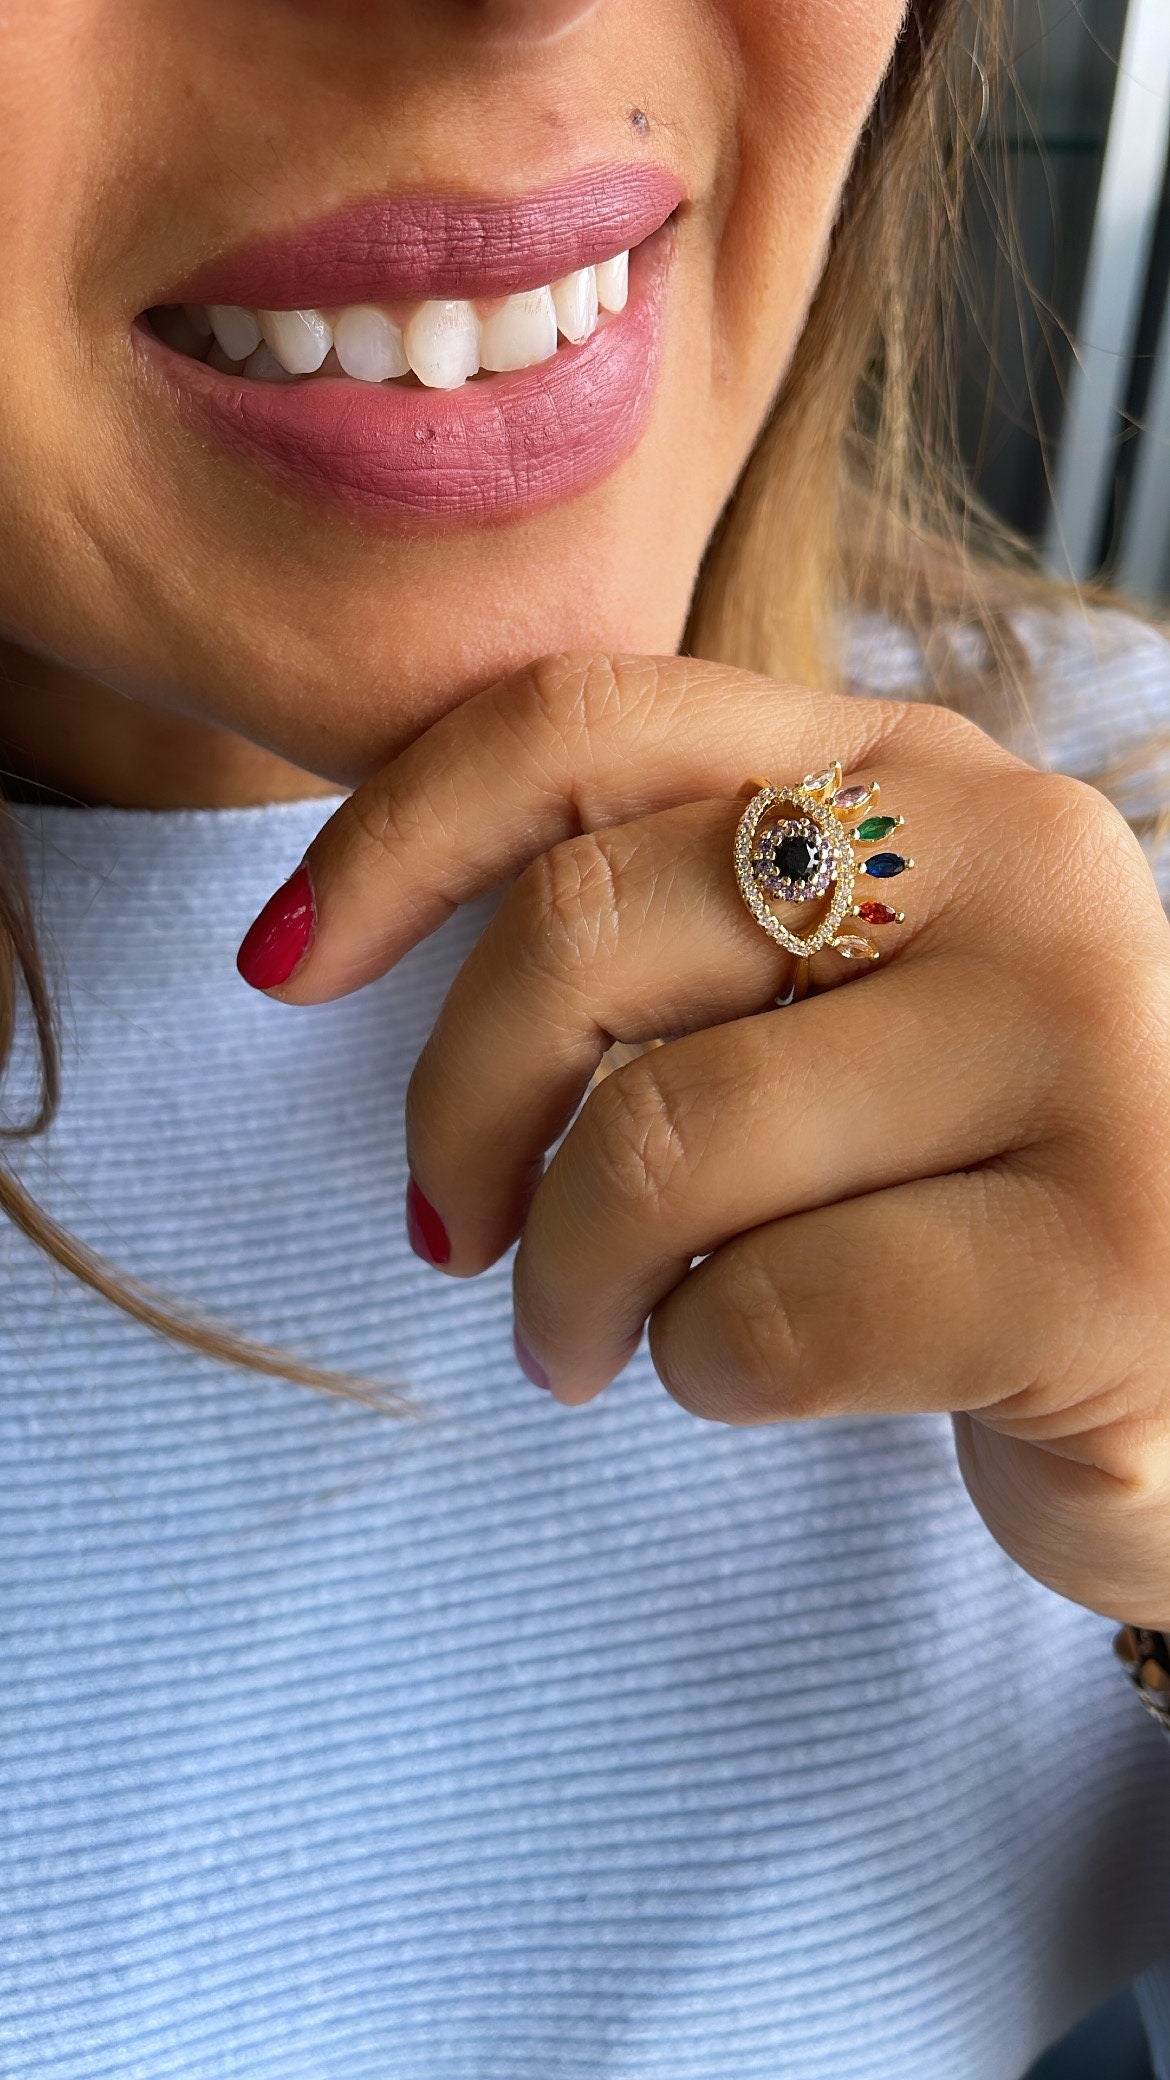 18k Gold Filled Adjustable Evil Eye Ring Crowned Featuring Multi Color Zirconia Stones